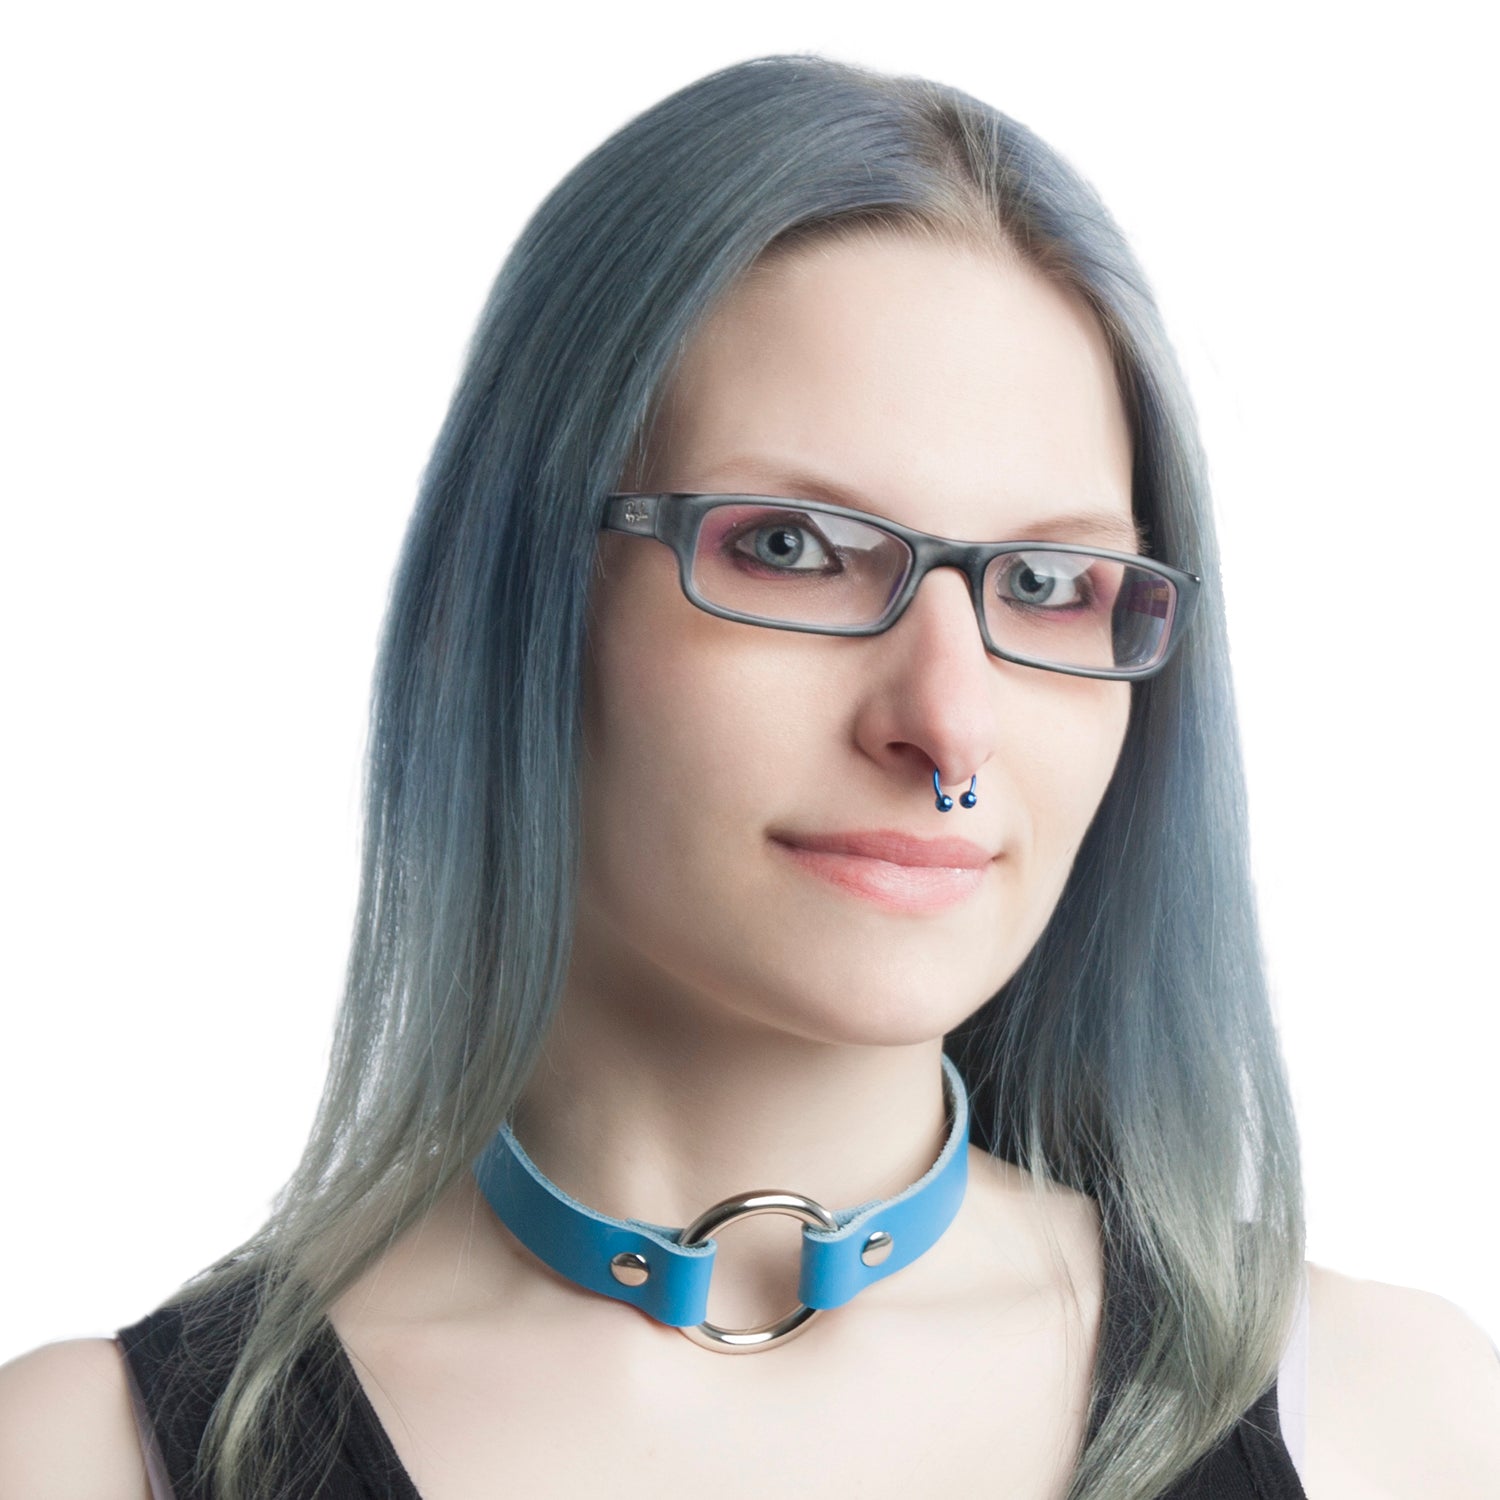 pastel kawaii light blue basic dreamy collar. Pawstar leather choker for furry conventions, halloween, cosplay and alt fashion. Made in America since 2003.